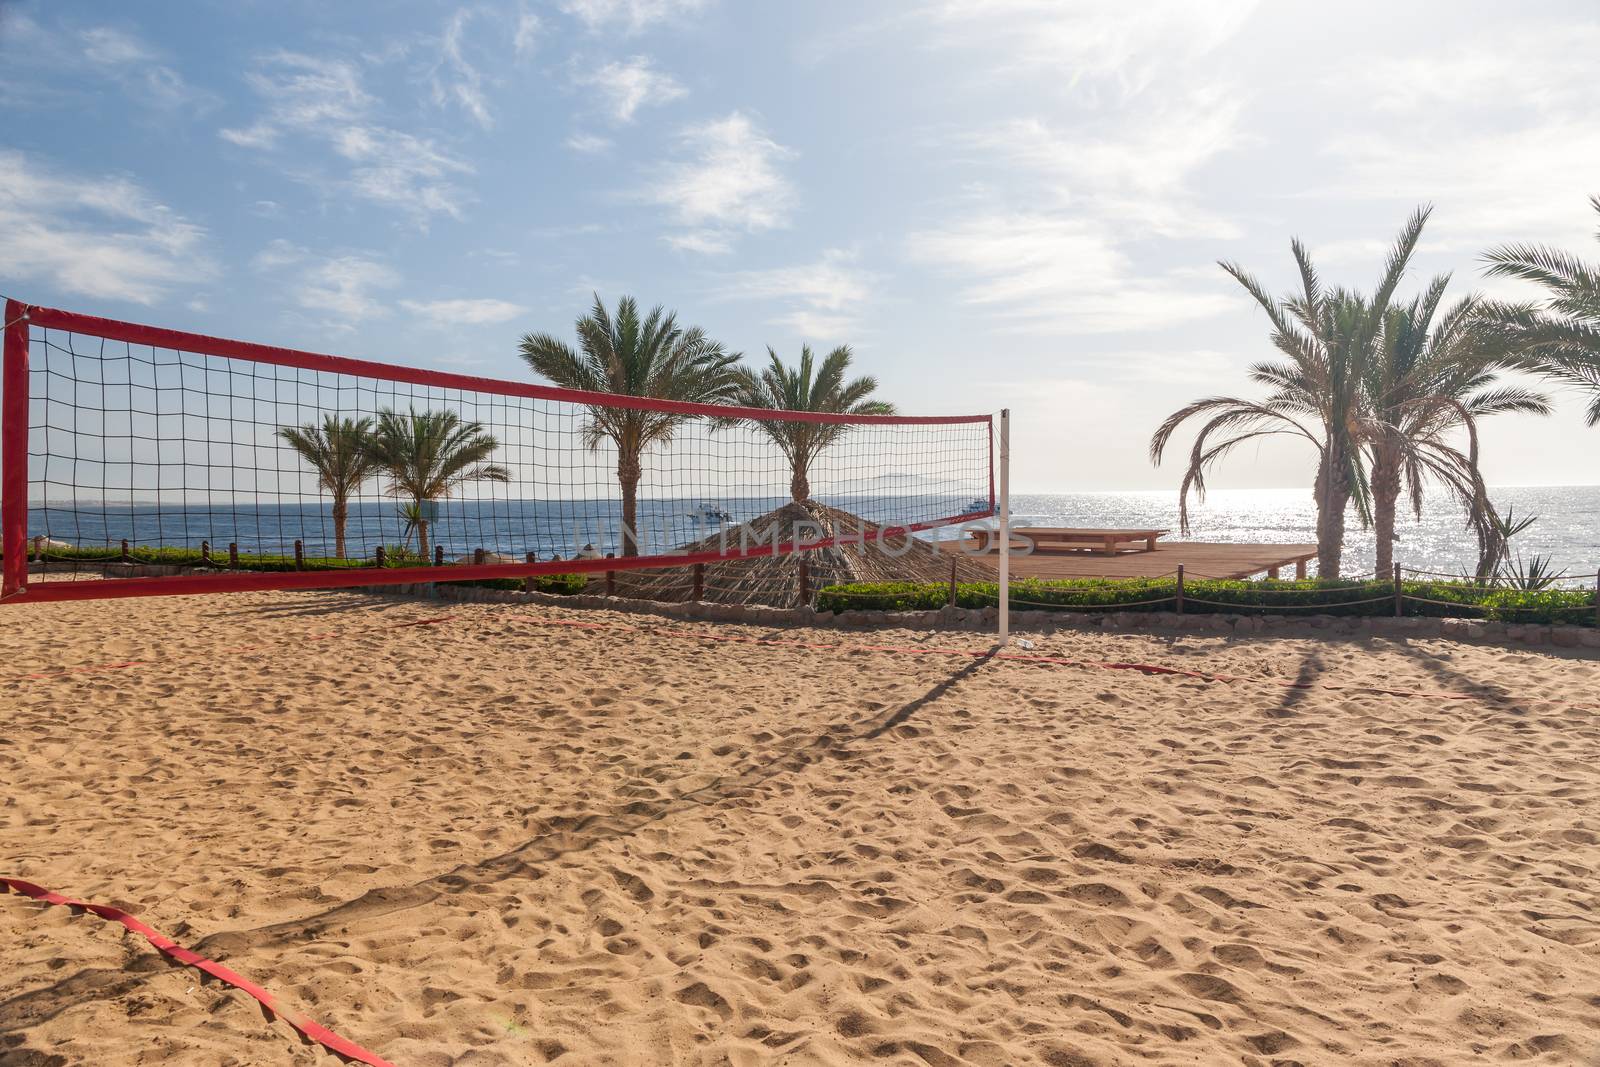 The beach at the luxury hotel, Sharm el Sheikh, Egypt. view from the volleyball court